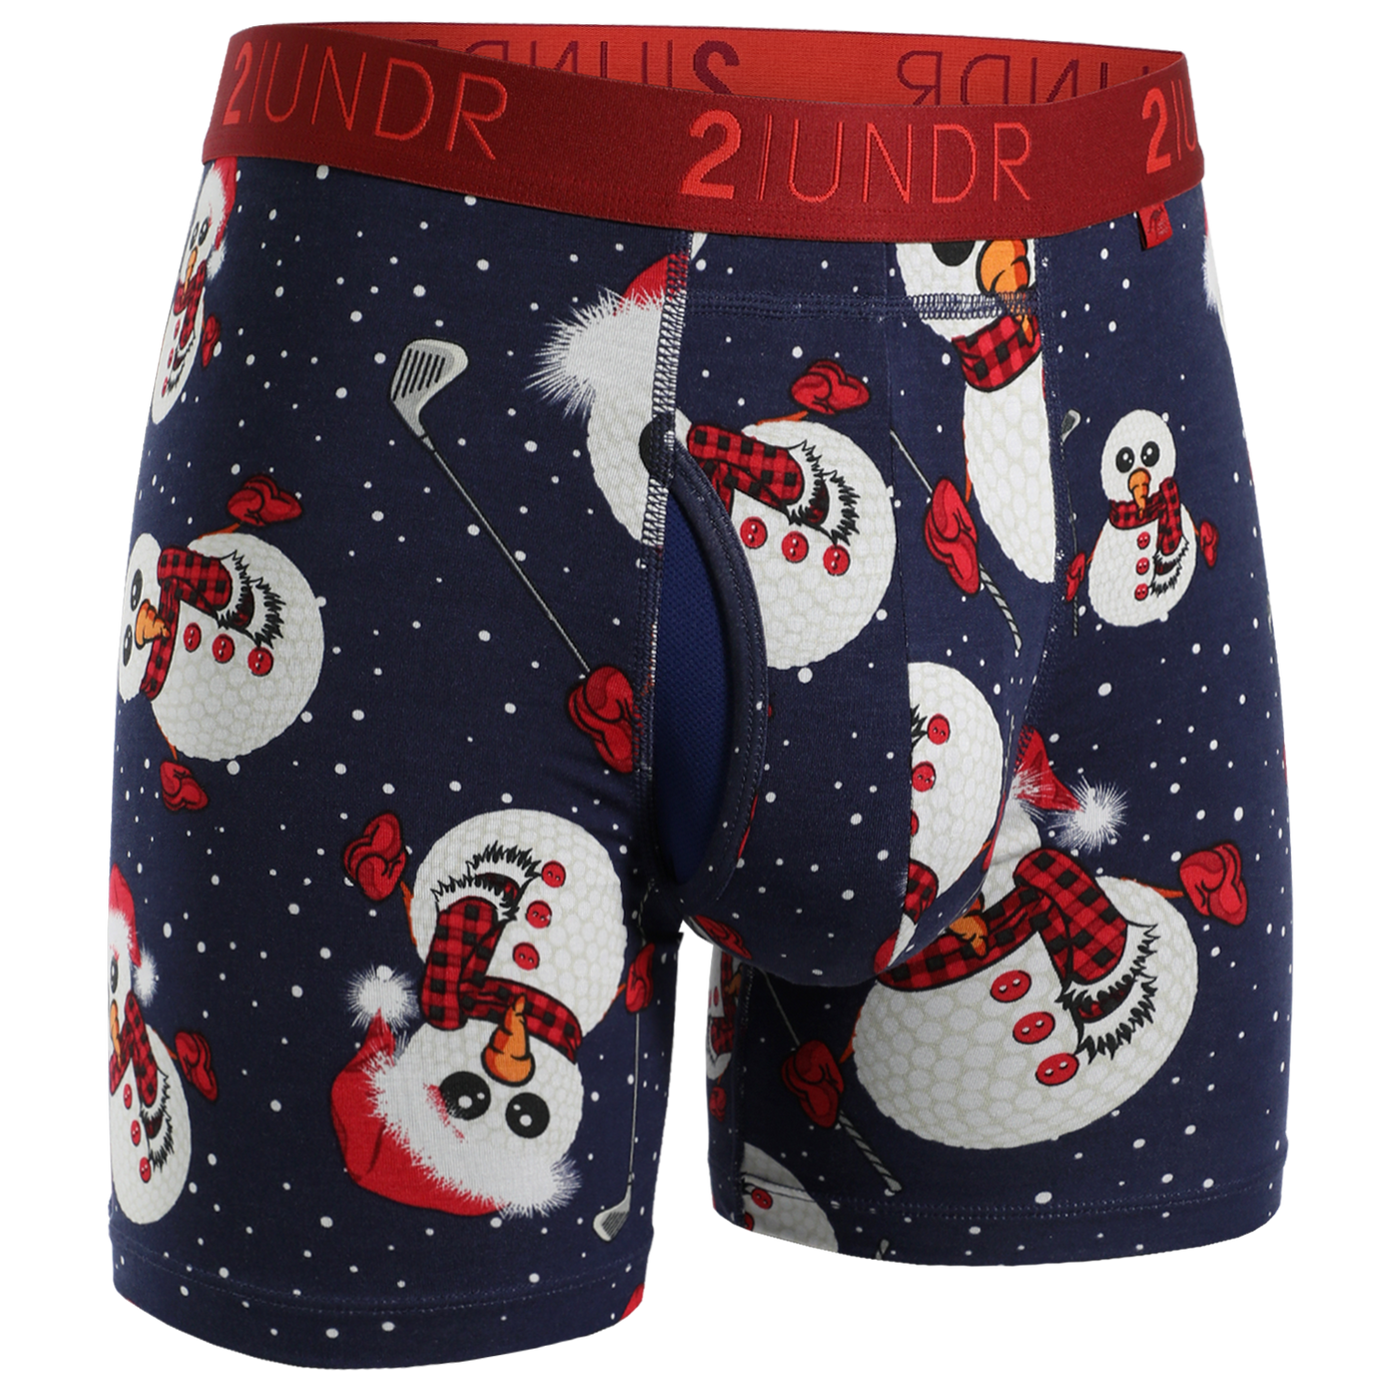 Swing Shift Boxer Brief - Frosty Balls